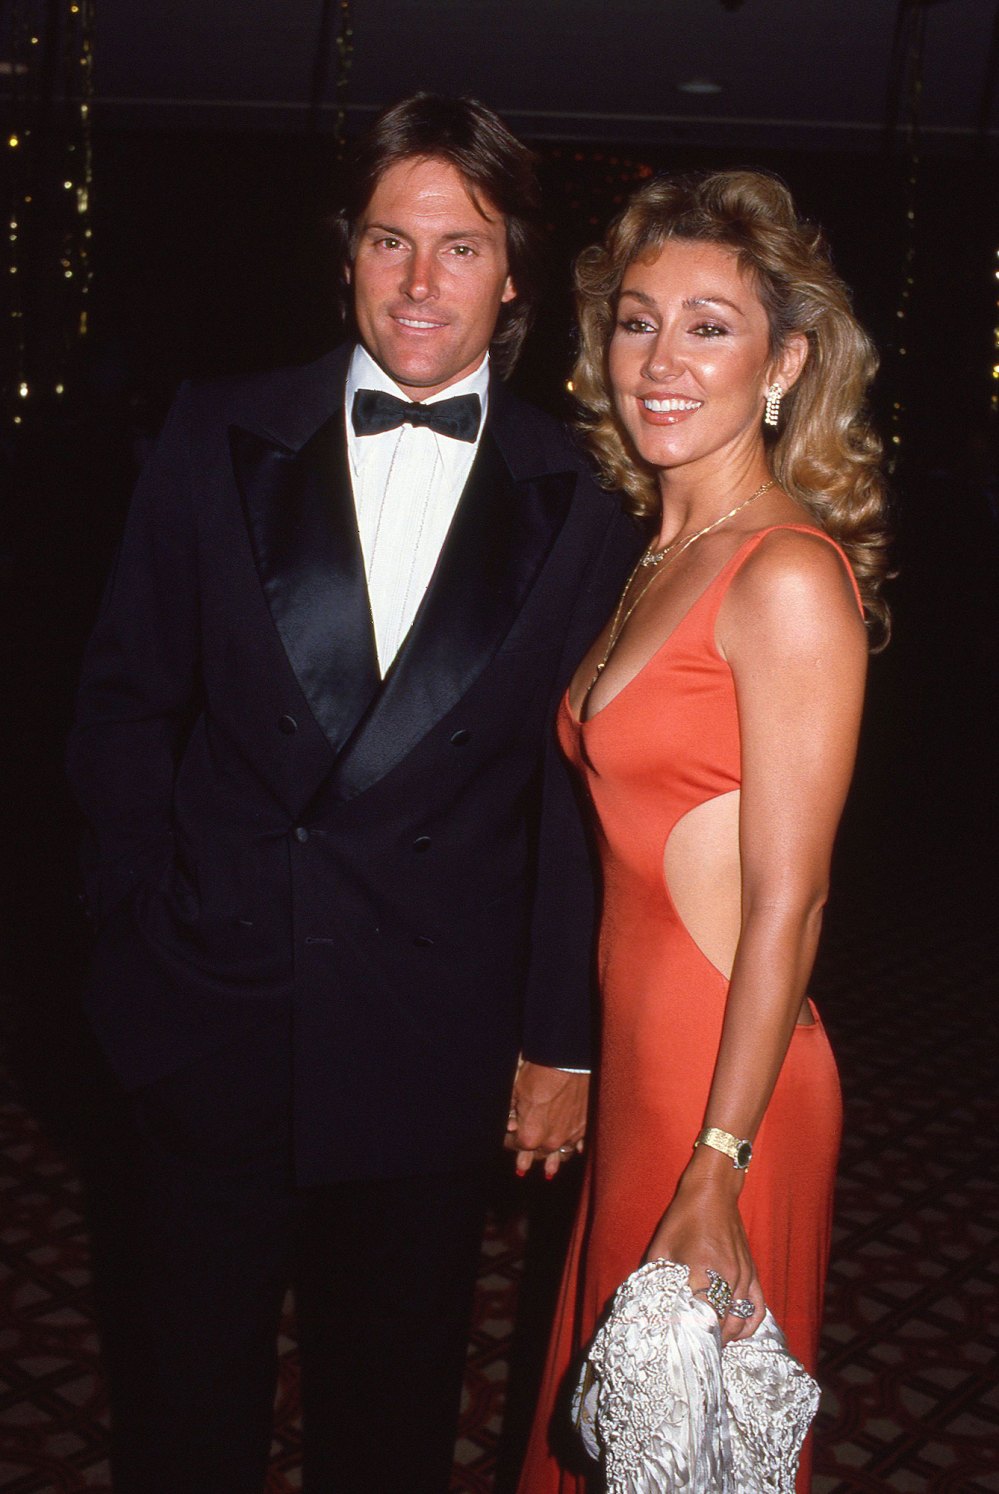 Bruce Jenner’s Ex-Wife Linda Thompson Recalls When He Confessed to Her: “I Mourned the Death of My Marriage, My Man”